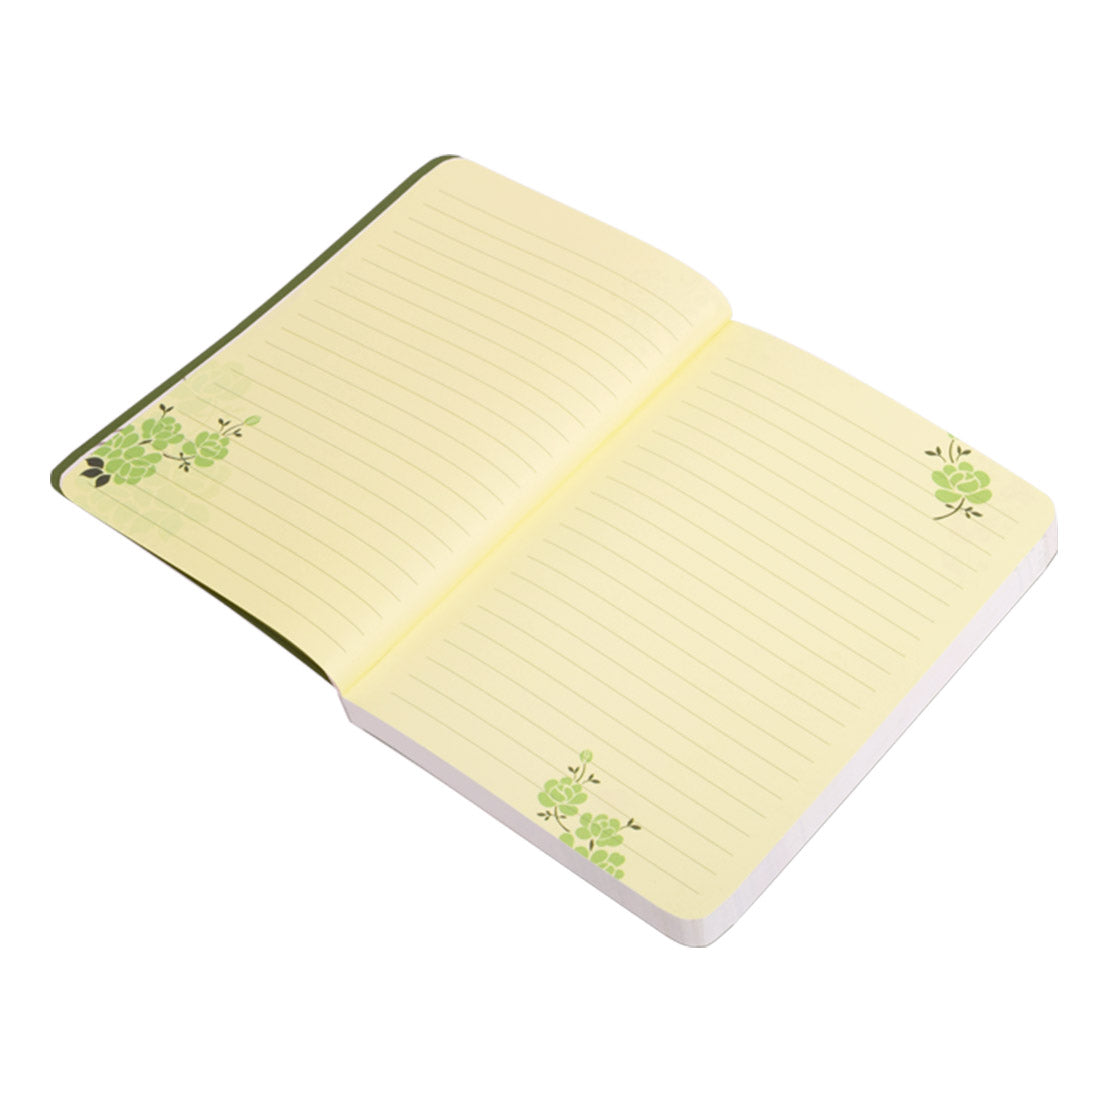 Initial W - Floral Monogram Notebook